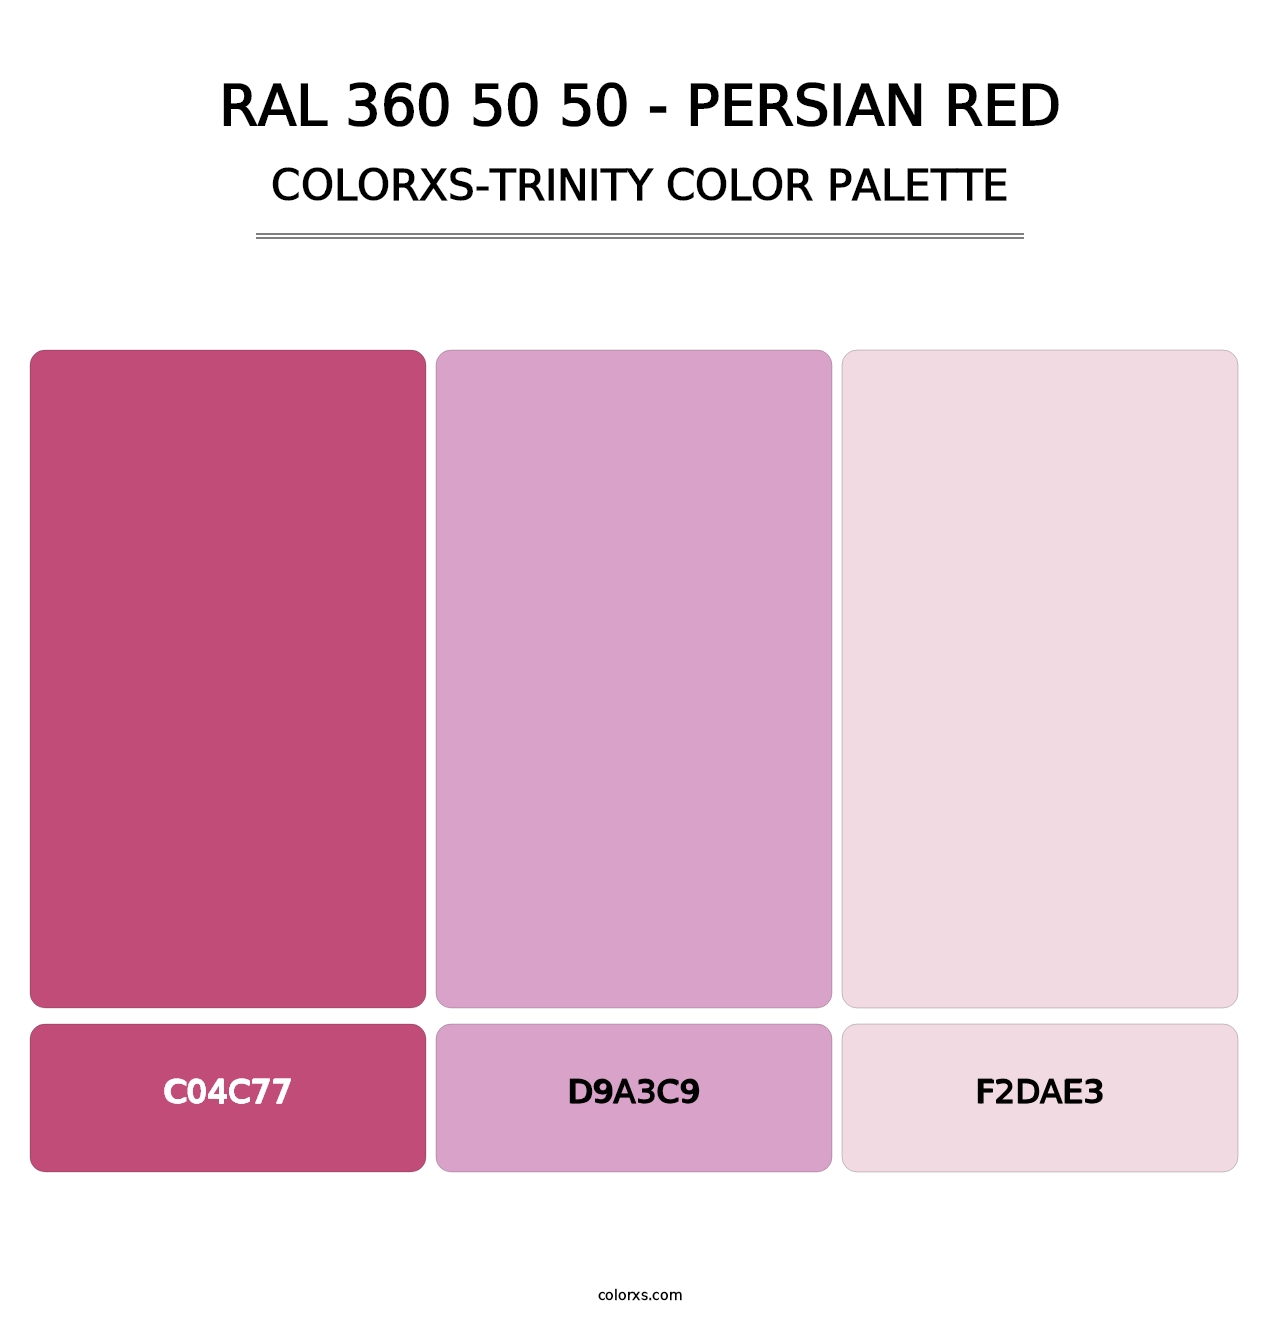 RAL 360 50 50 - Persian Red - Colorxs Trinity Palette